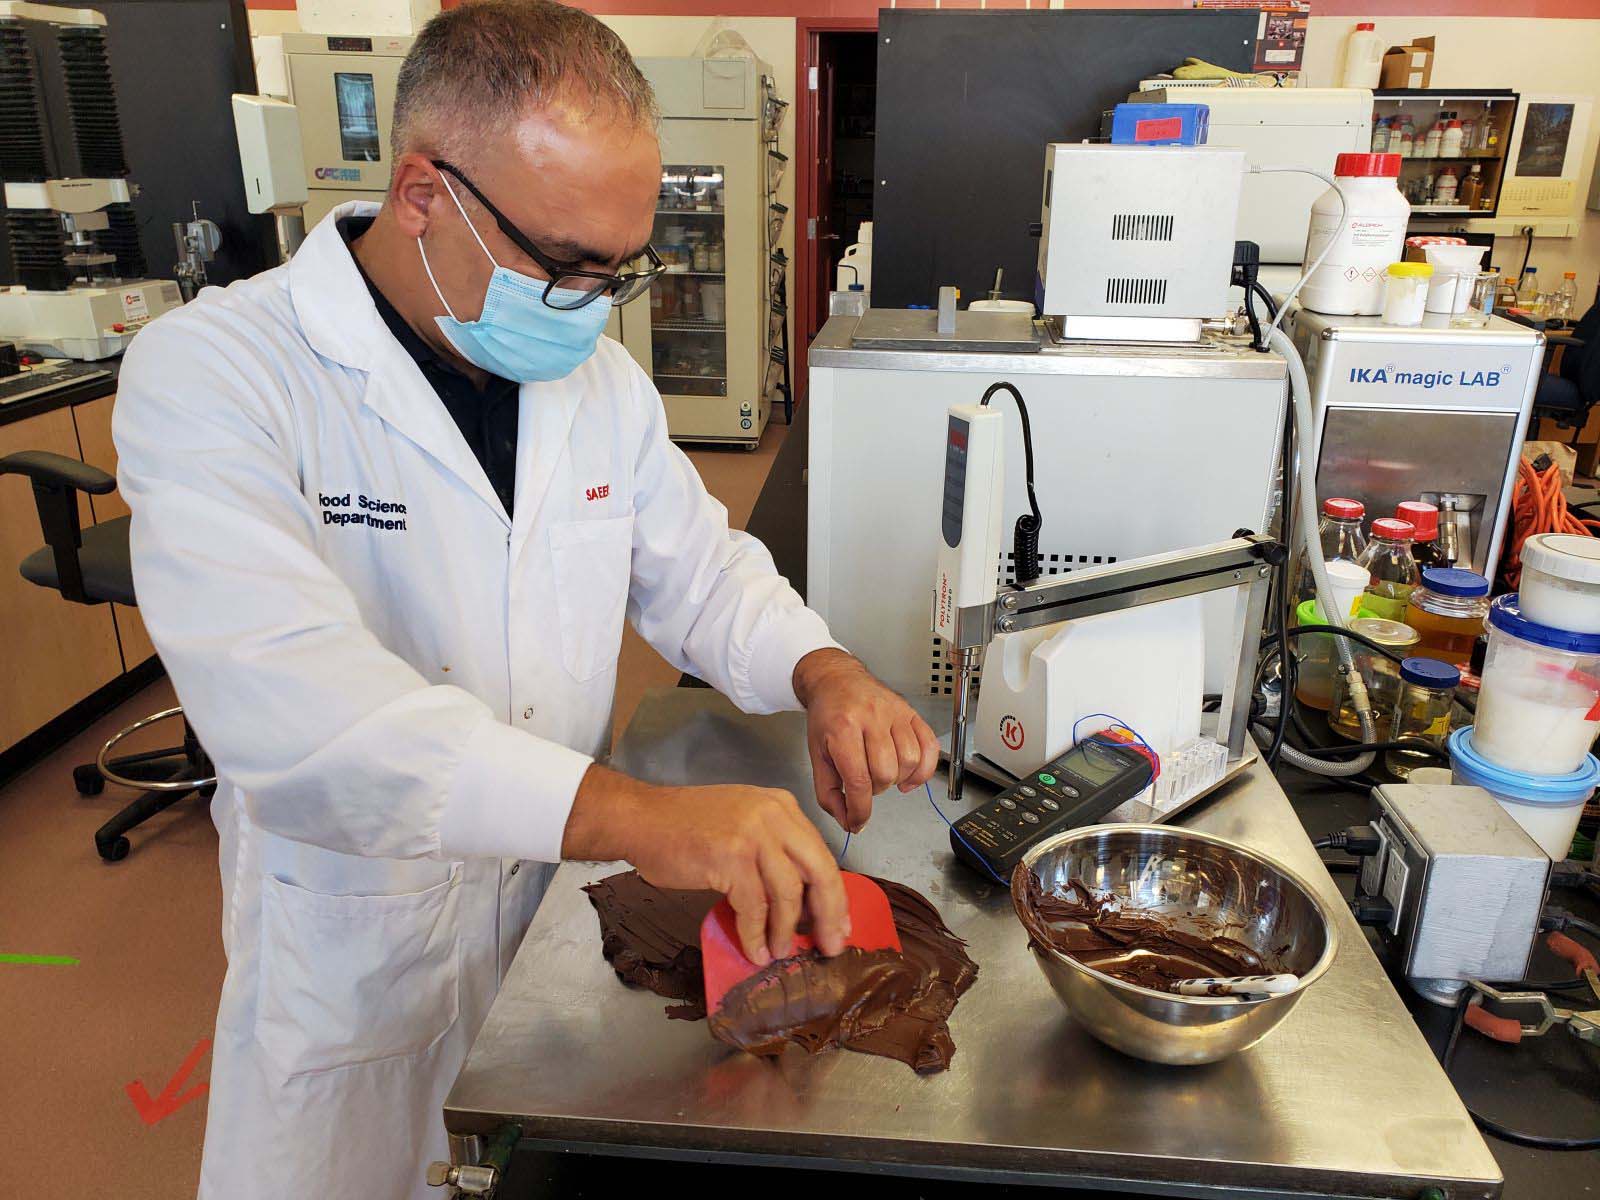 Dr. Saeed Ghazani tempering chocolate. Dept. Food Science University of Guelph.